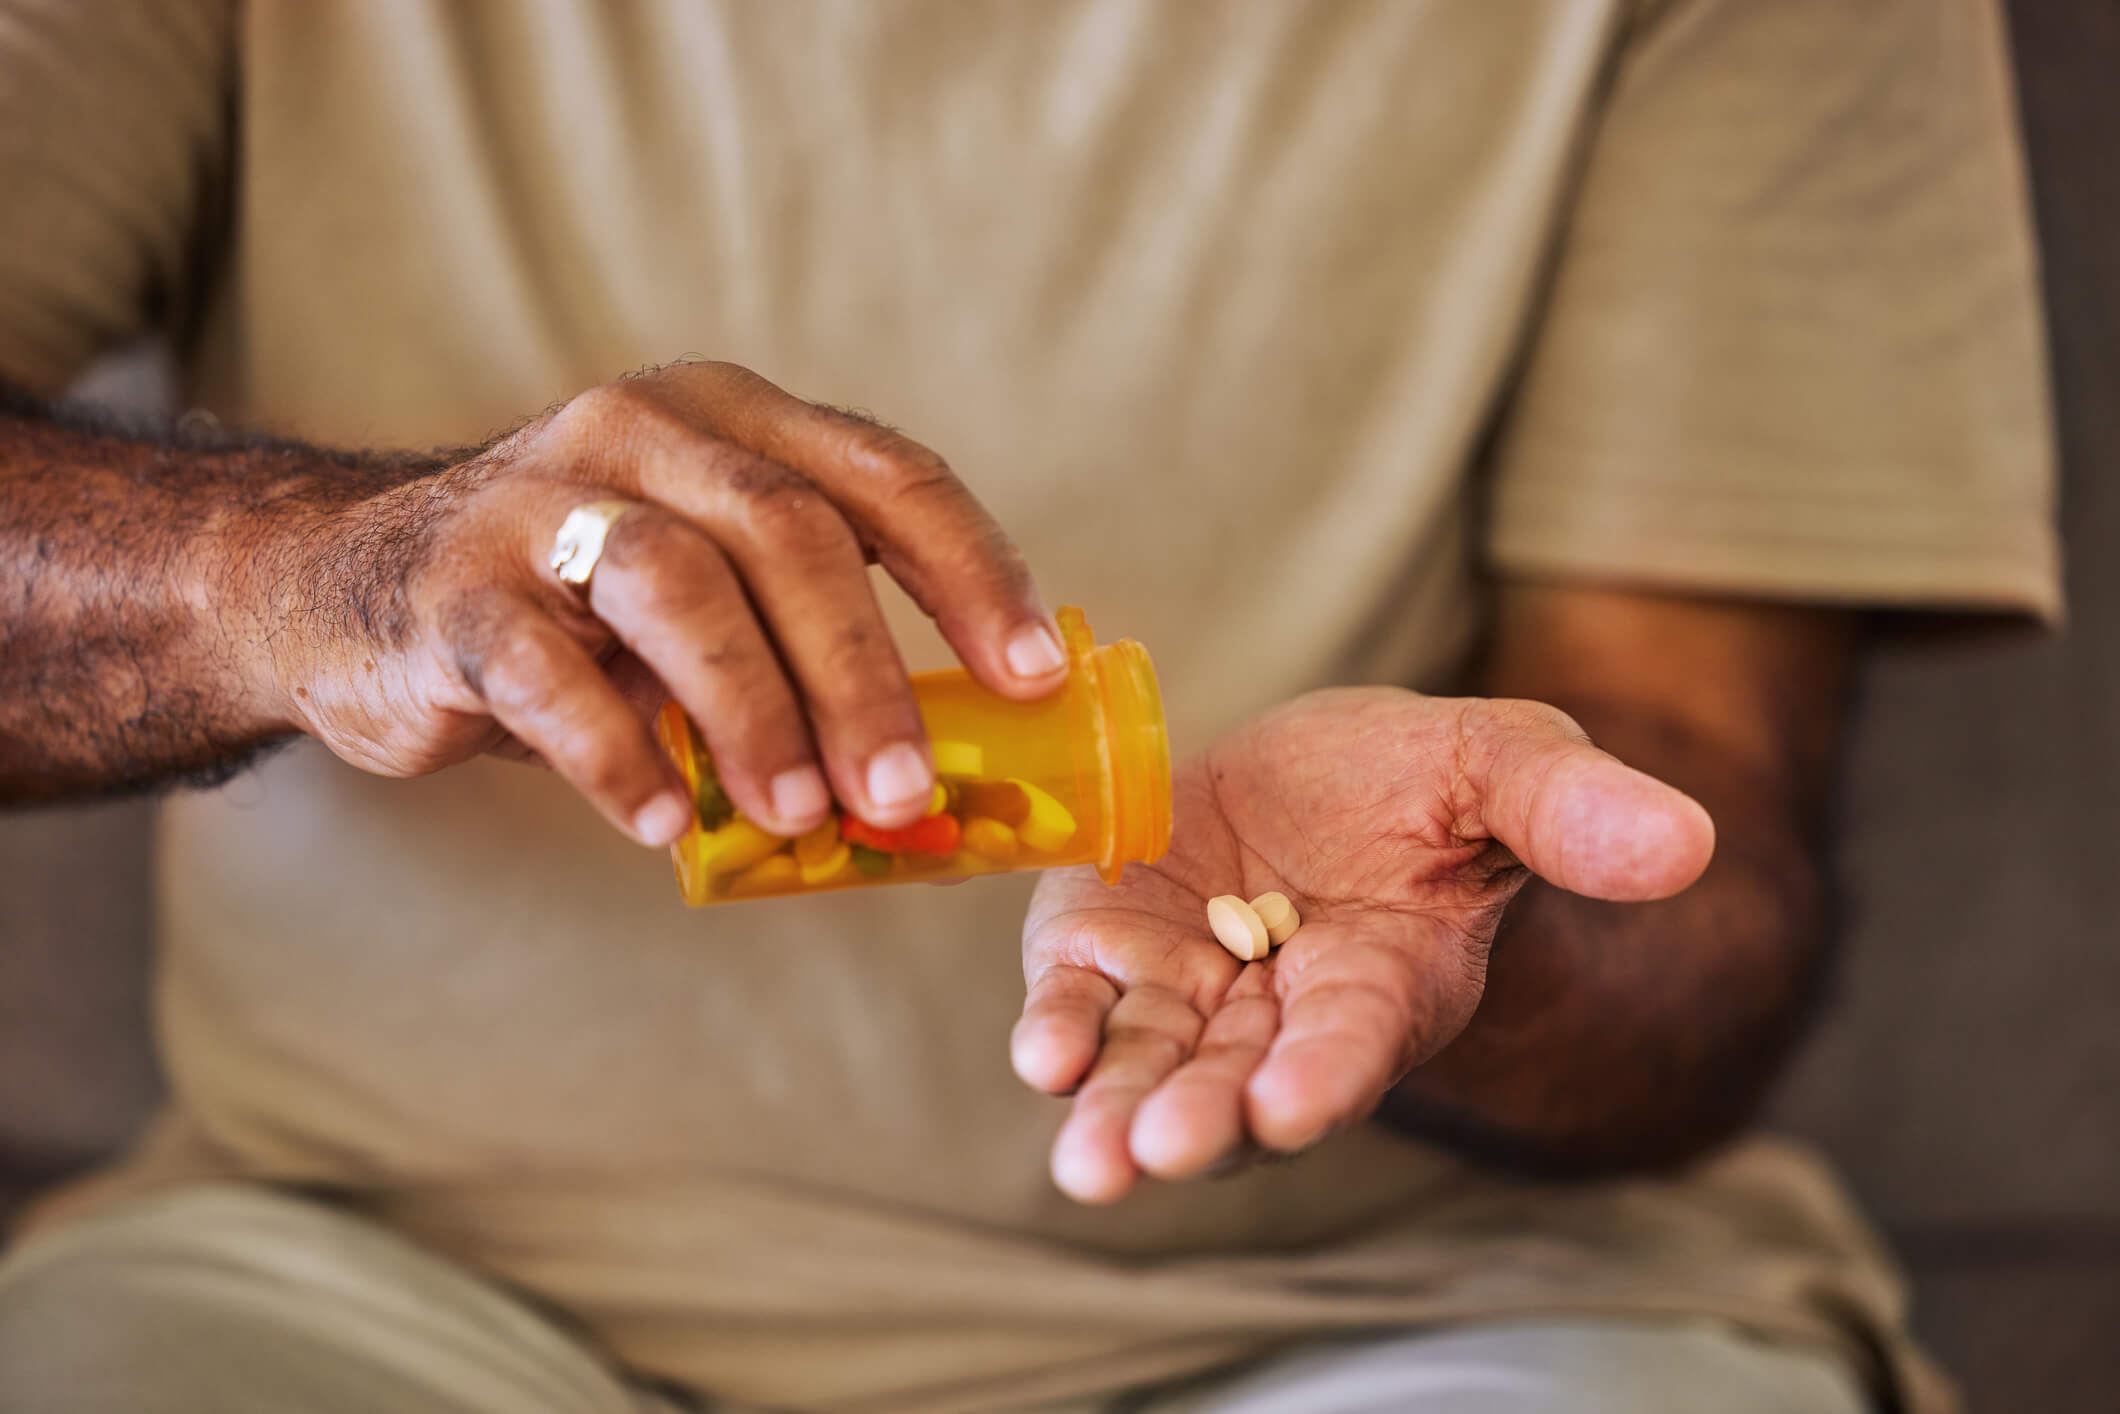 A person pouring prescription pills out of a bottle into their hand.